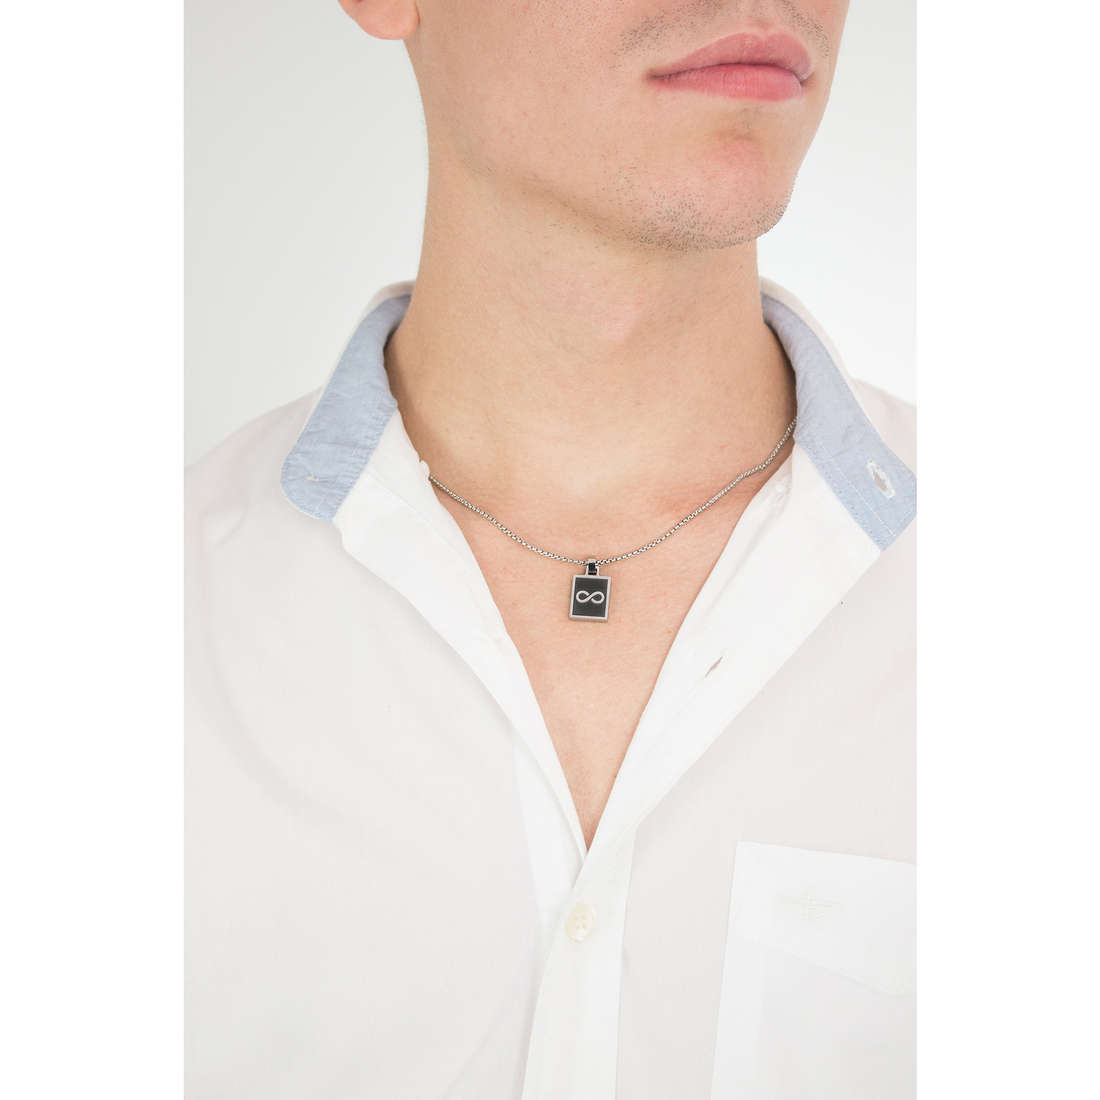 2Jewels colliers Infinity homme 251491 Je porte